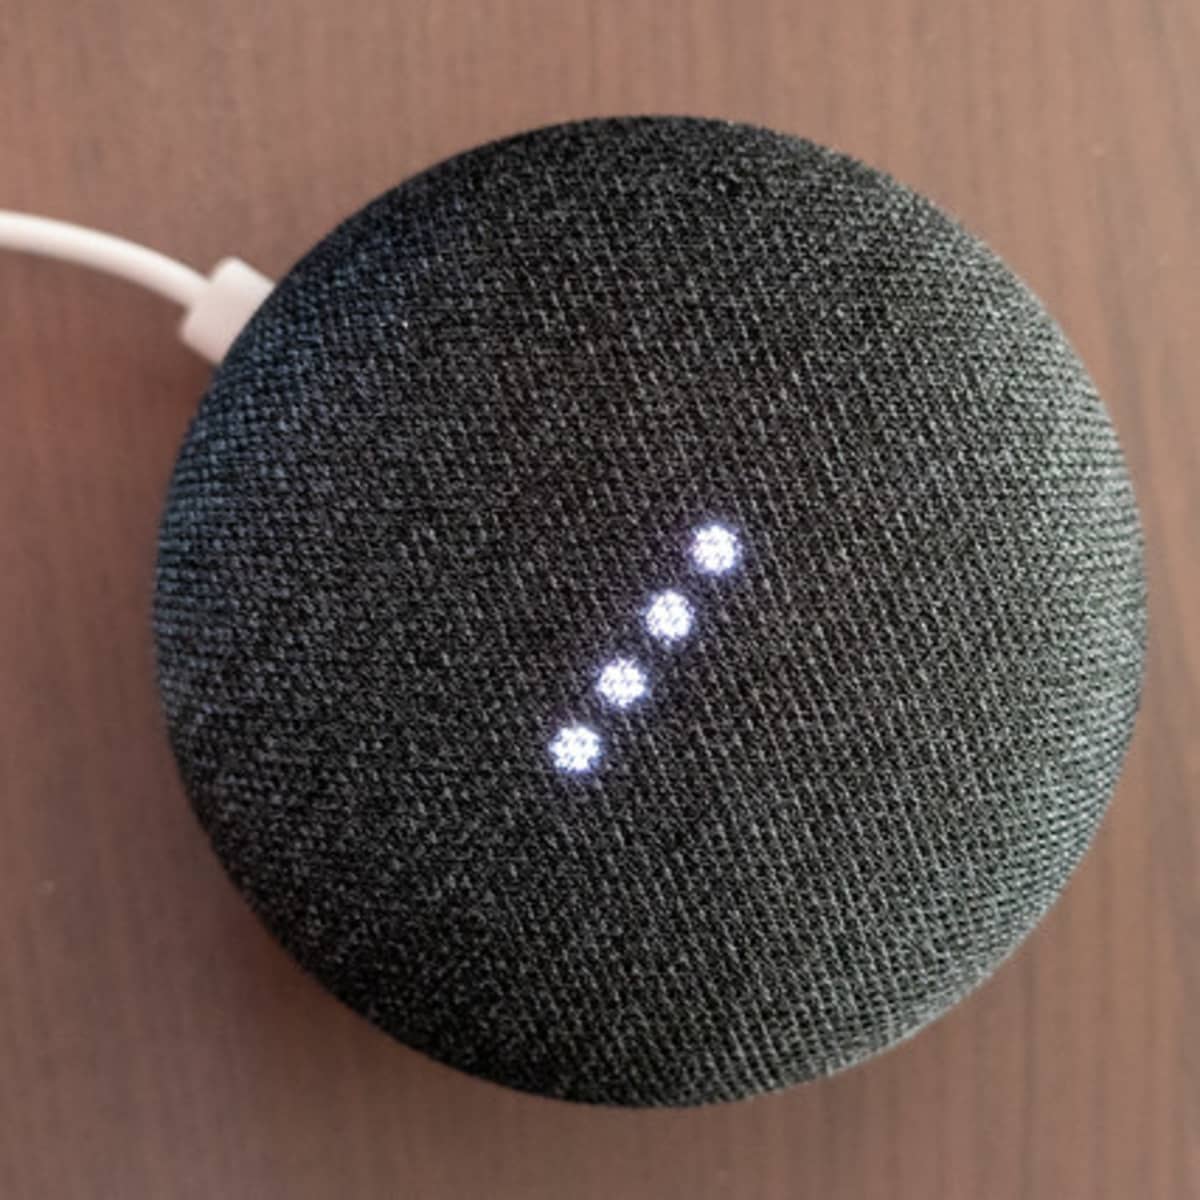 Alexa v Google Home: Pitting the voice assistants against